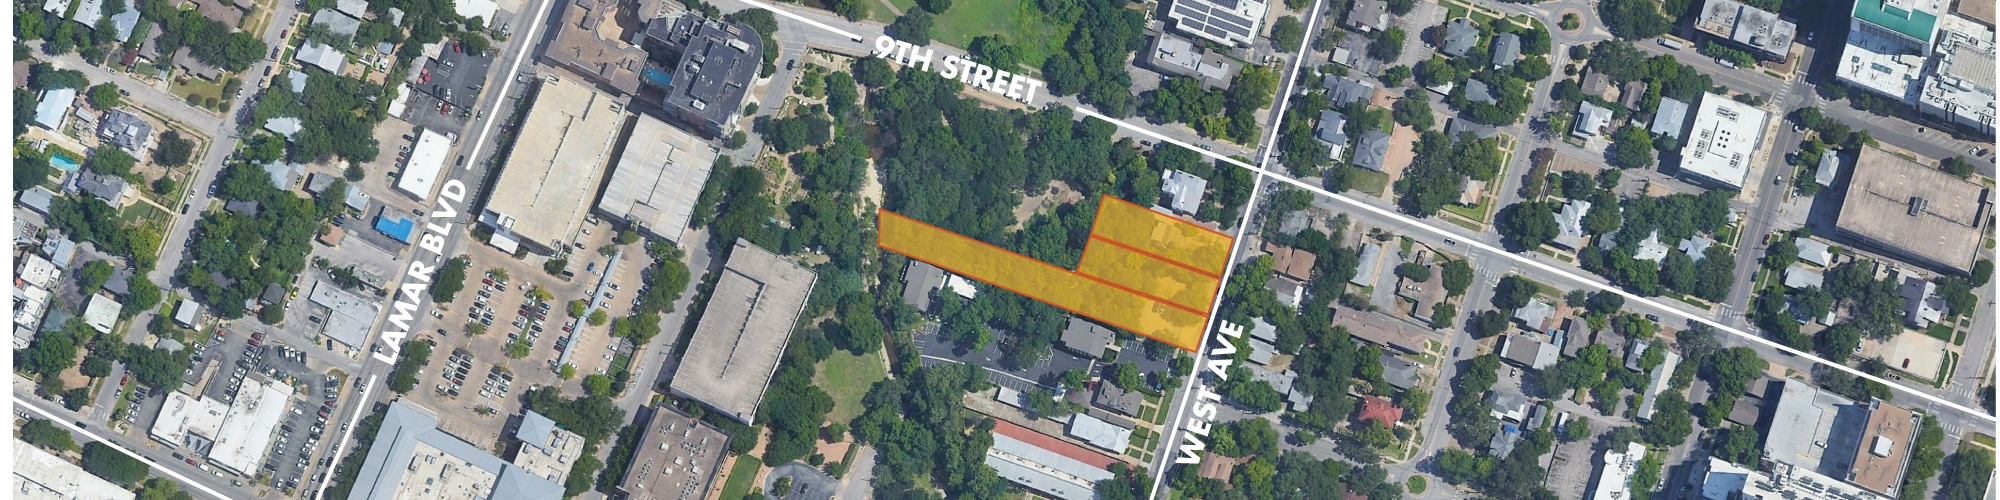 802, 804 & 806 West Avenue Ground Lease